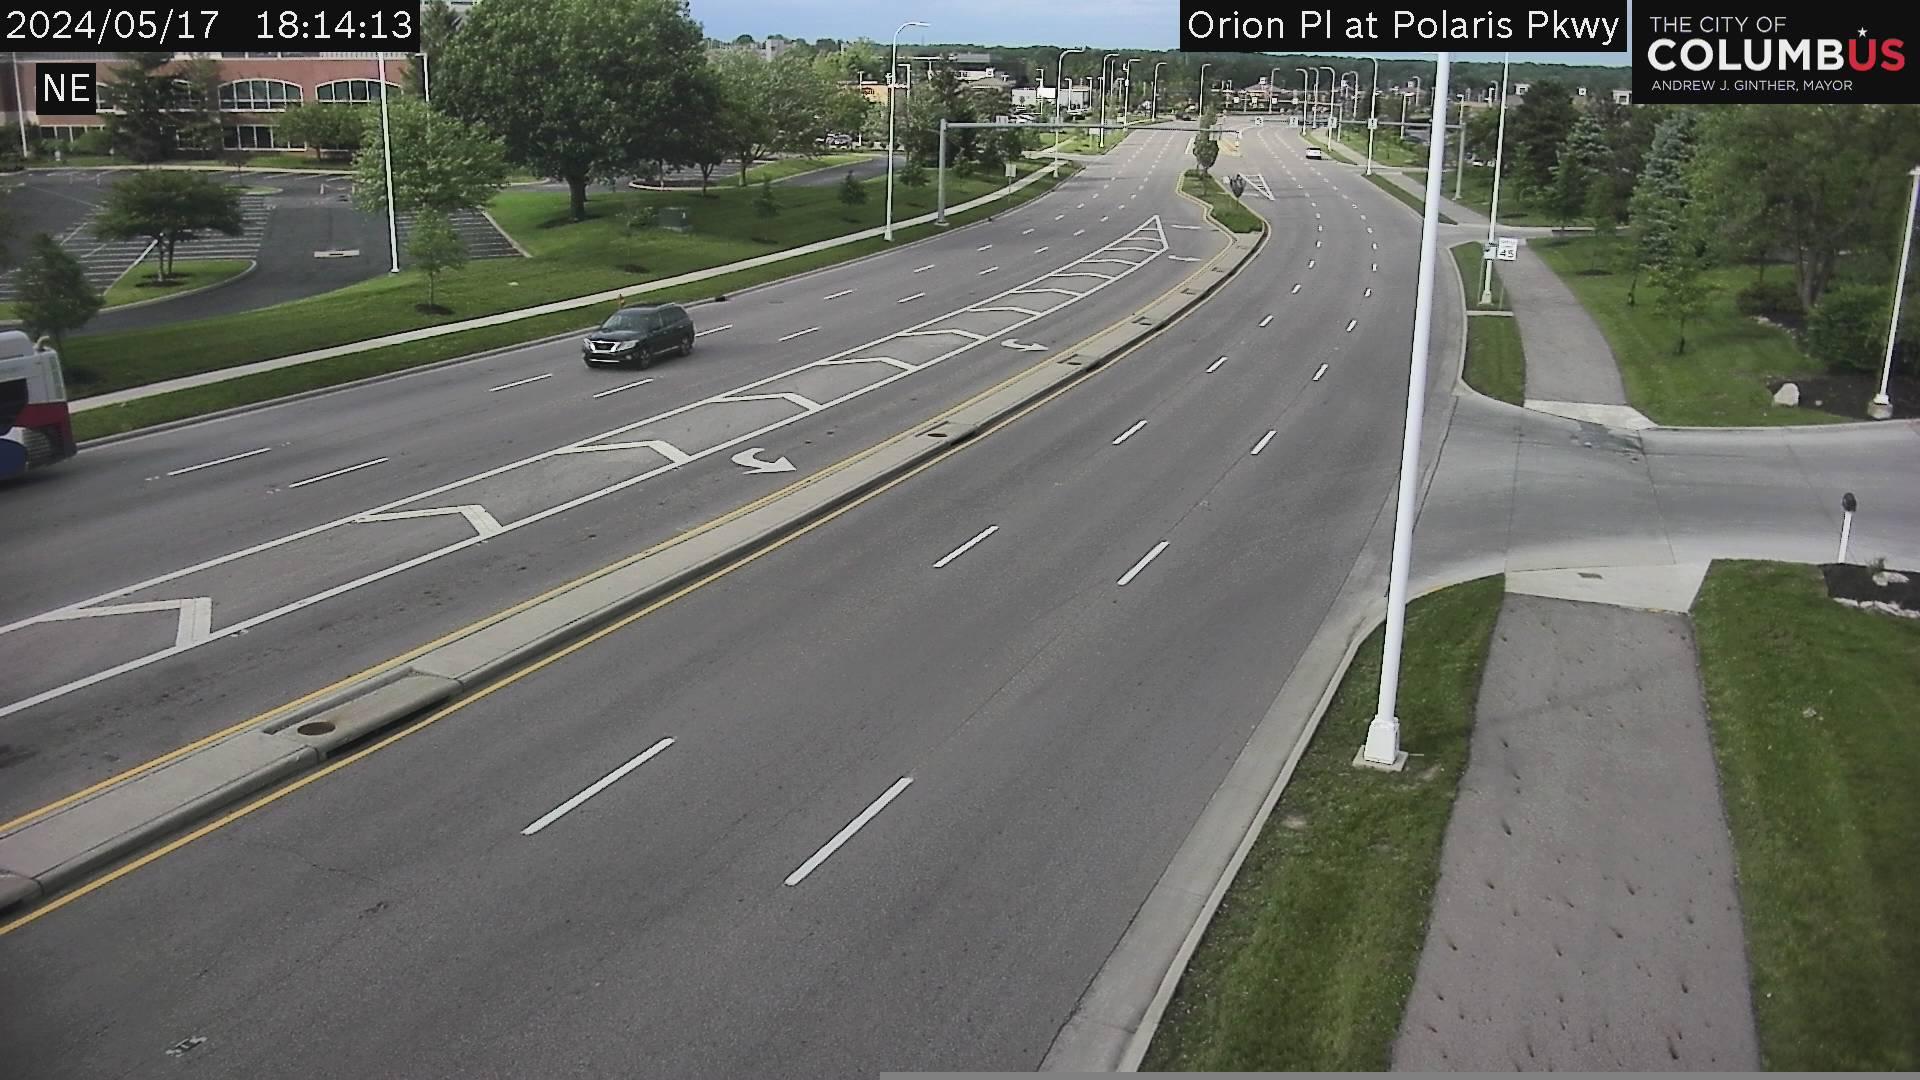 Traffic Cam Westerville: City of Columbus) Polaris Pkwy at Orion Pl Player